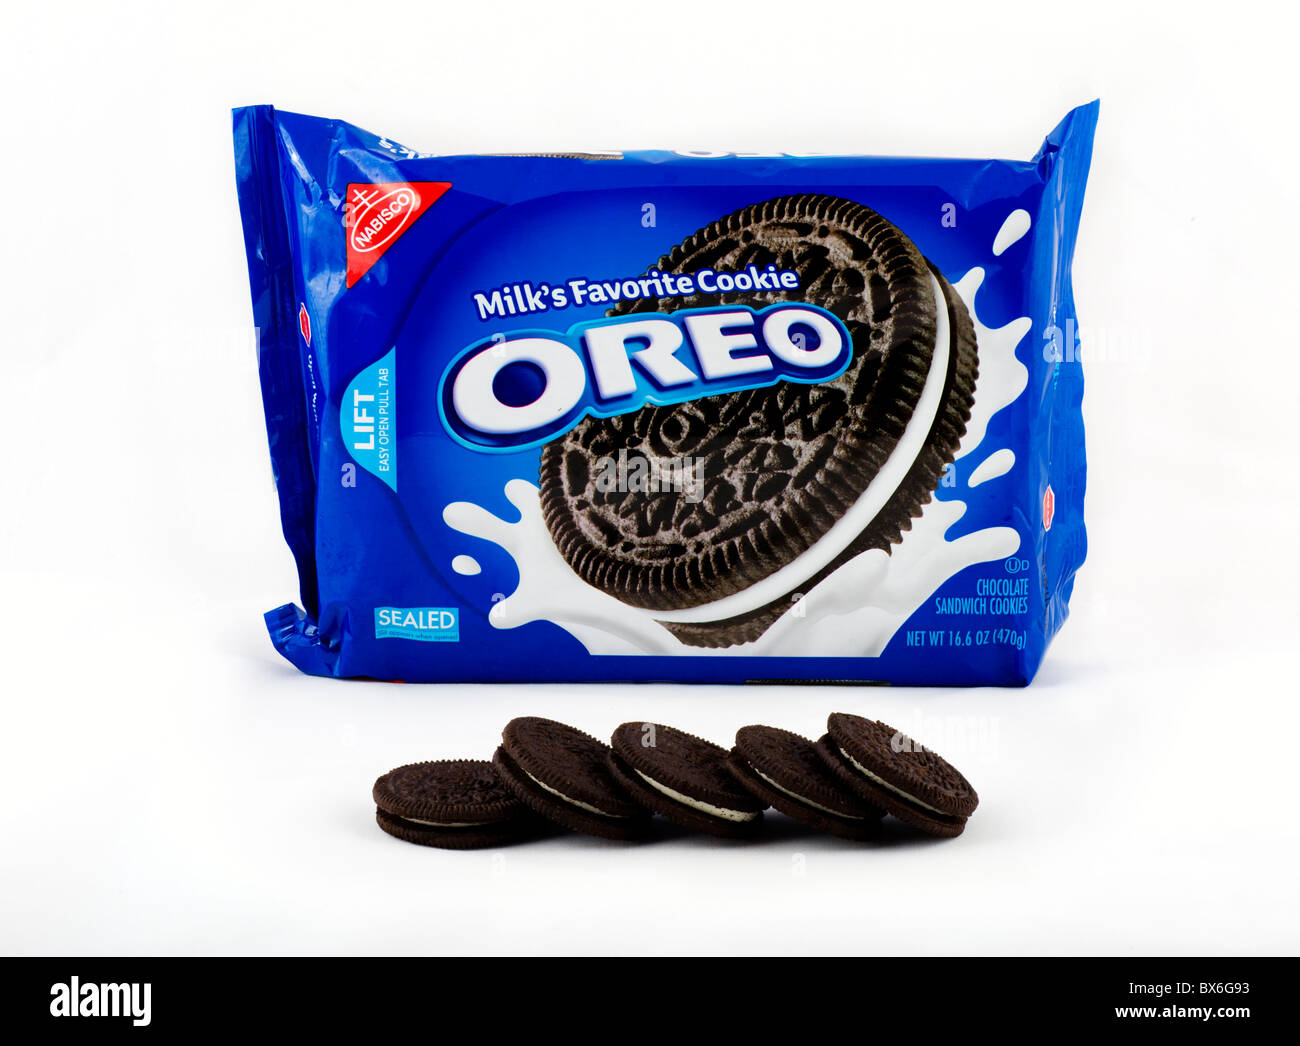 Packet of Oreo Cookies, USA Stock Photo